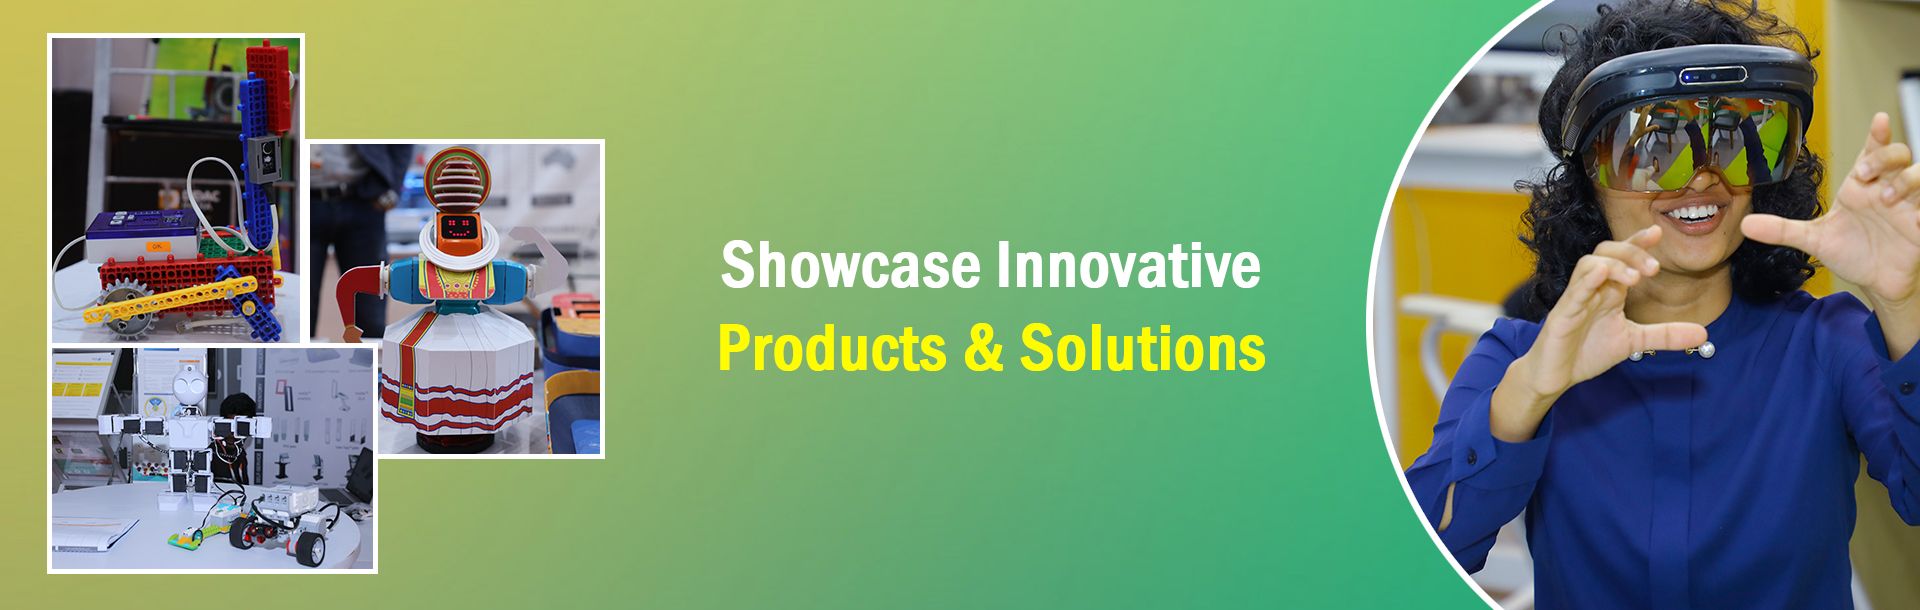 Showcase Innovative Products & Solutions